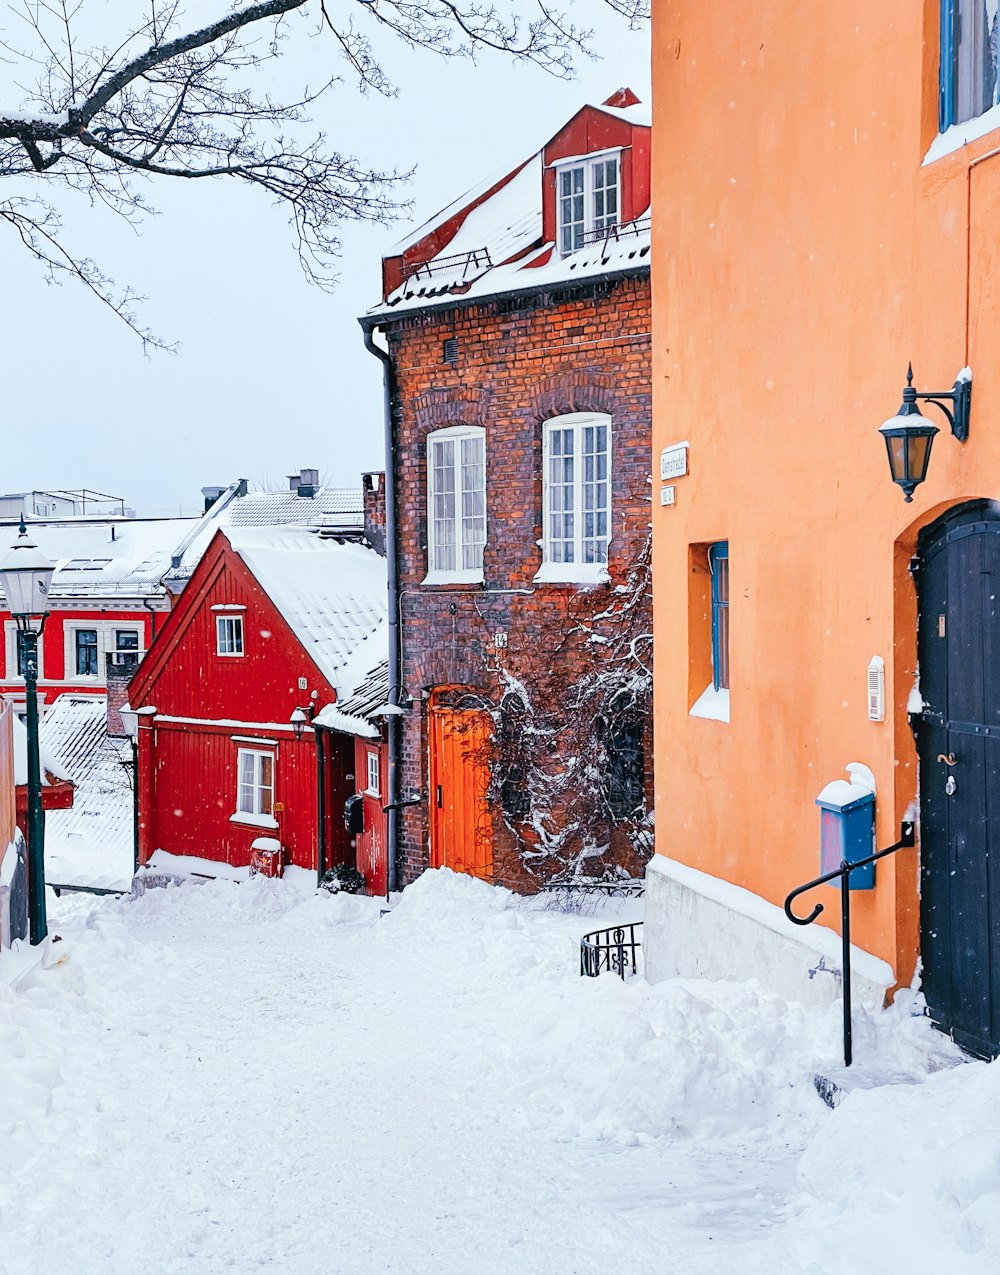 a snowy street with a red building and a tree